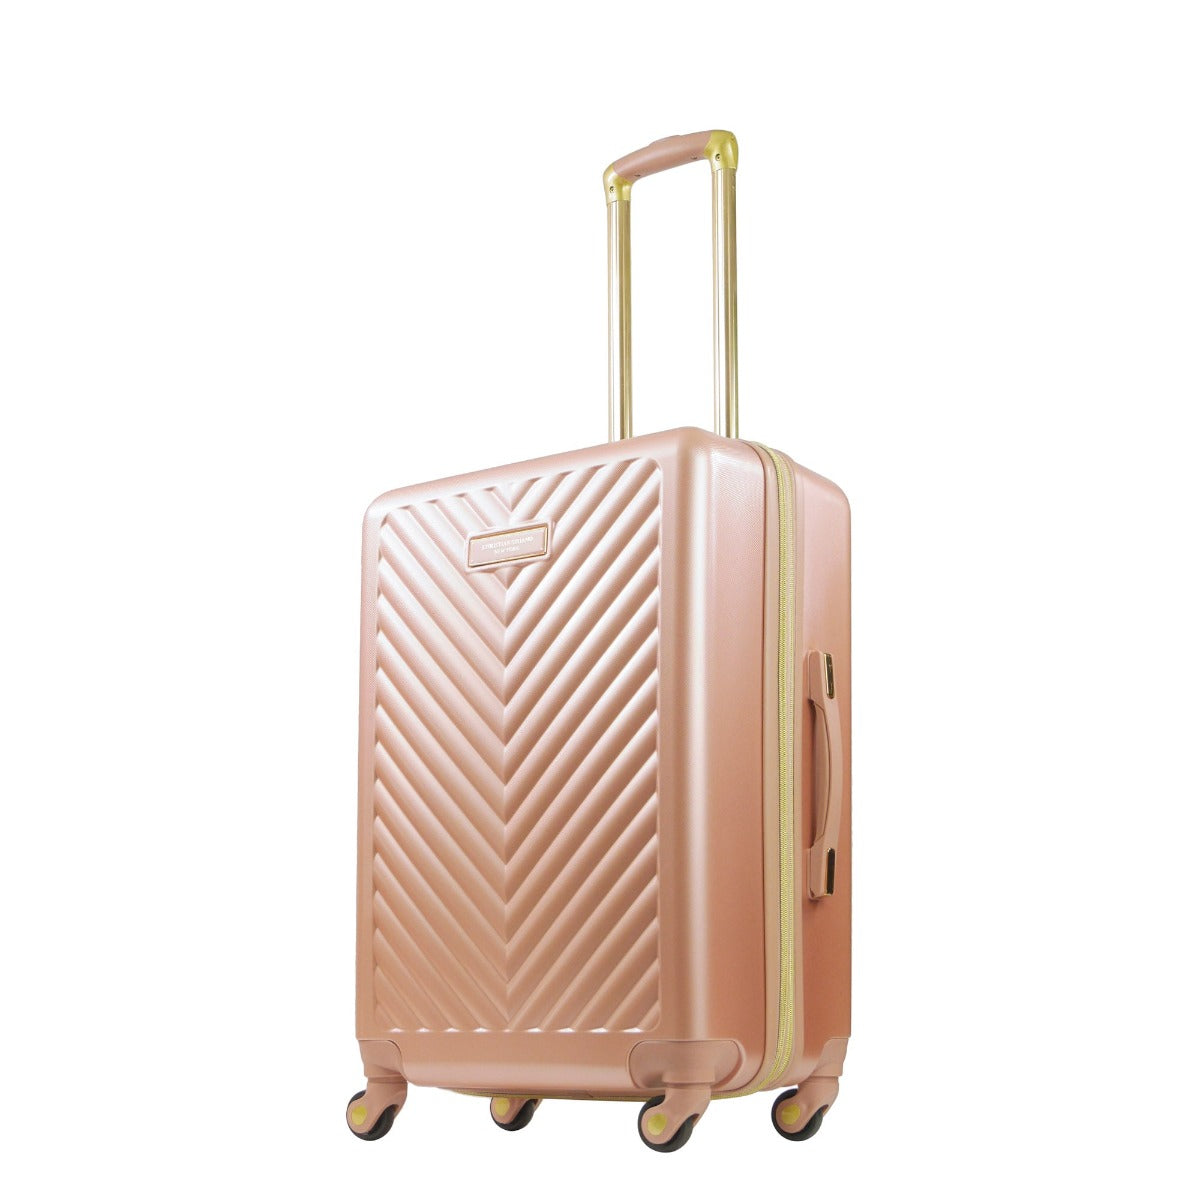 Christian Siriano Addie 25" checked luggage hardside spinner suitcase rose gold - best durable suitcases for travel